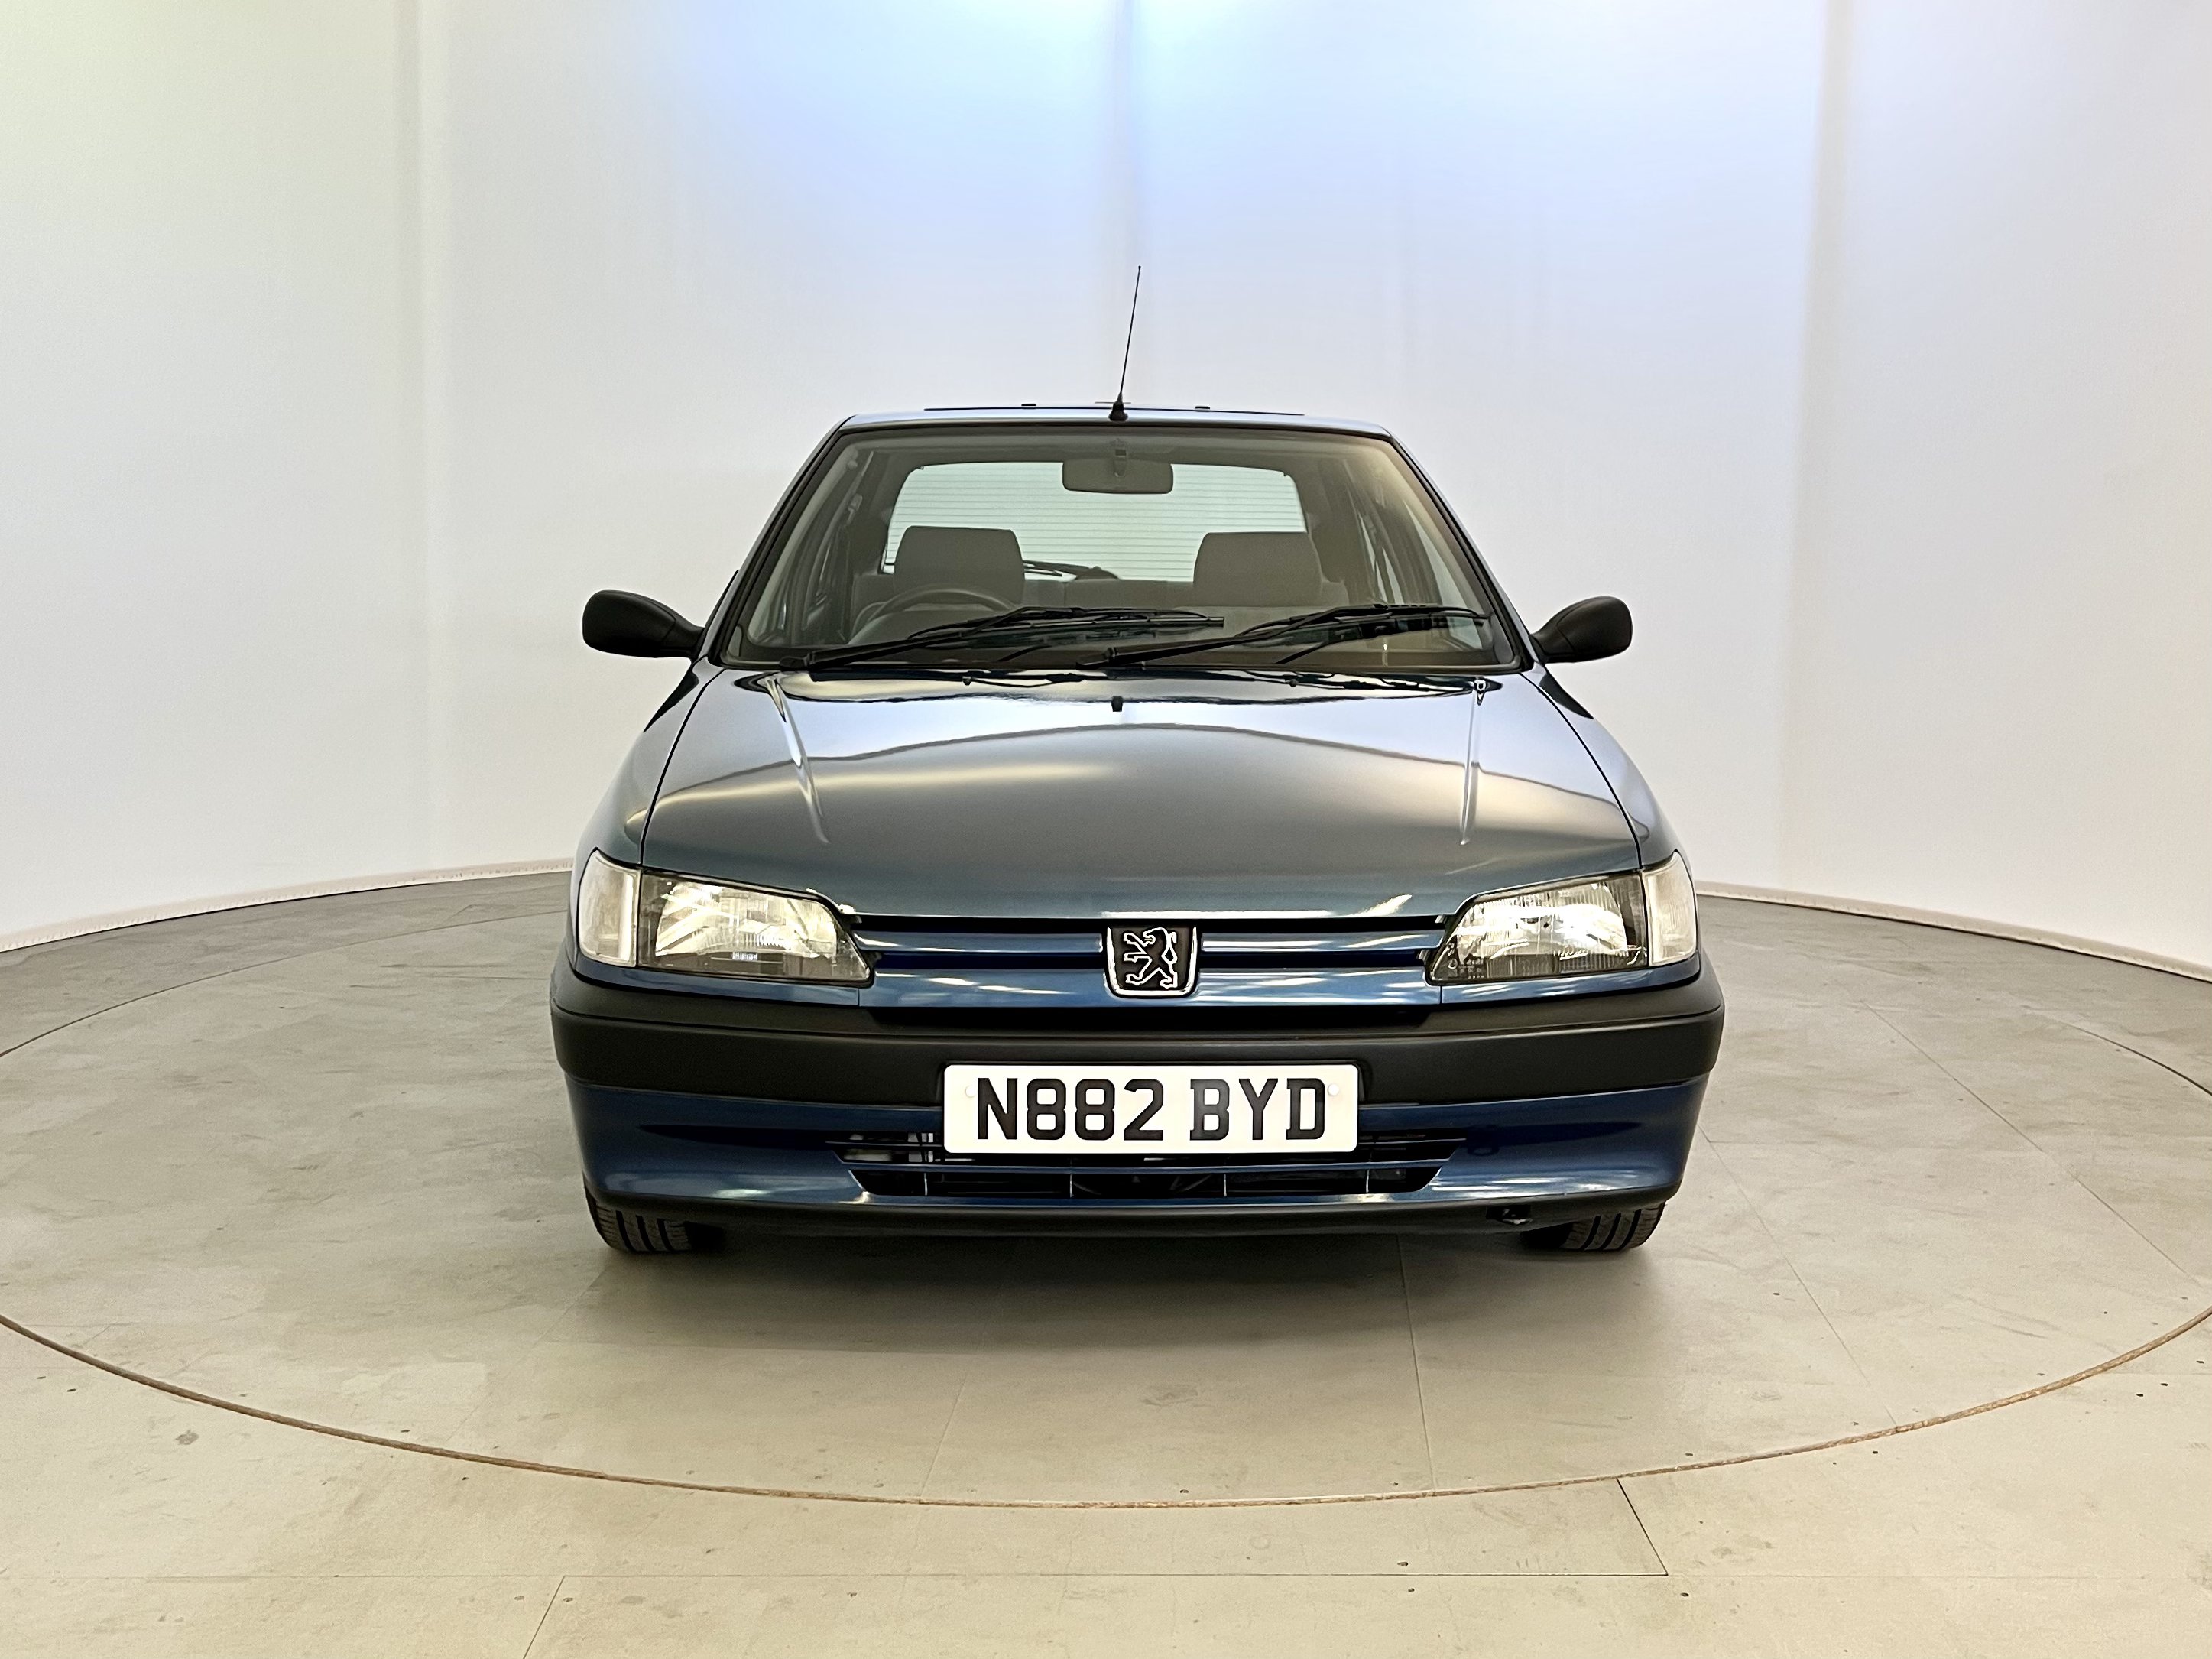 Peugeot 306 - Image 2 of 36